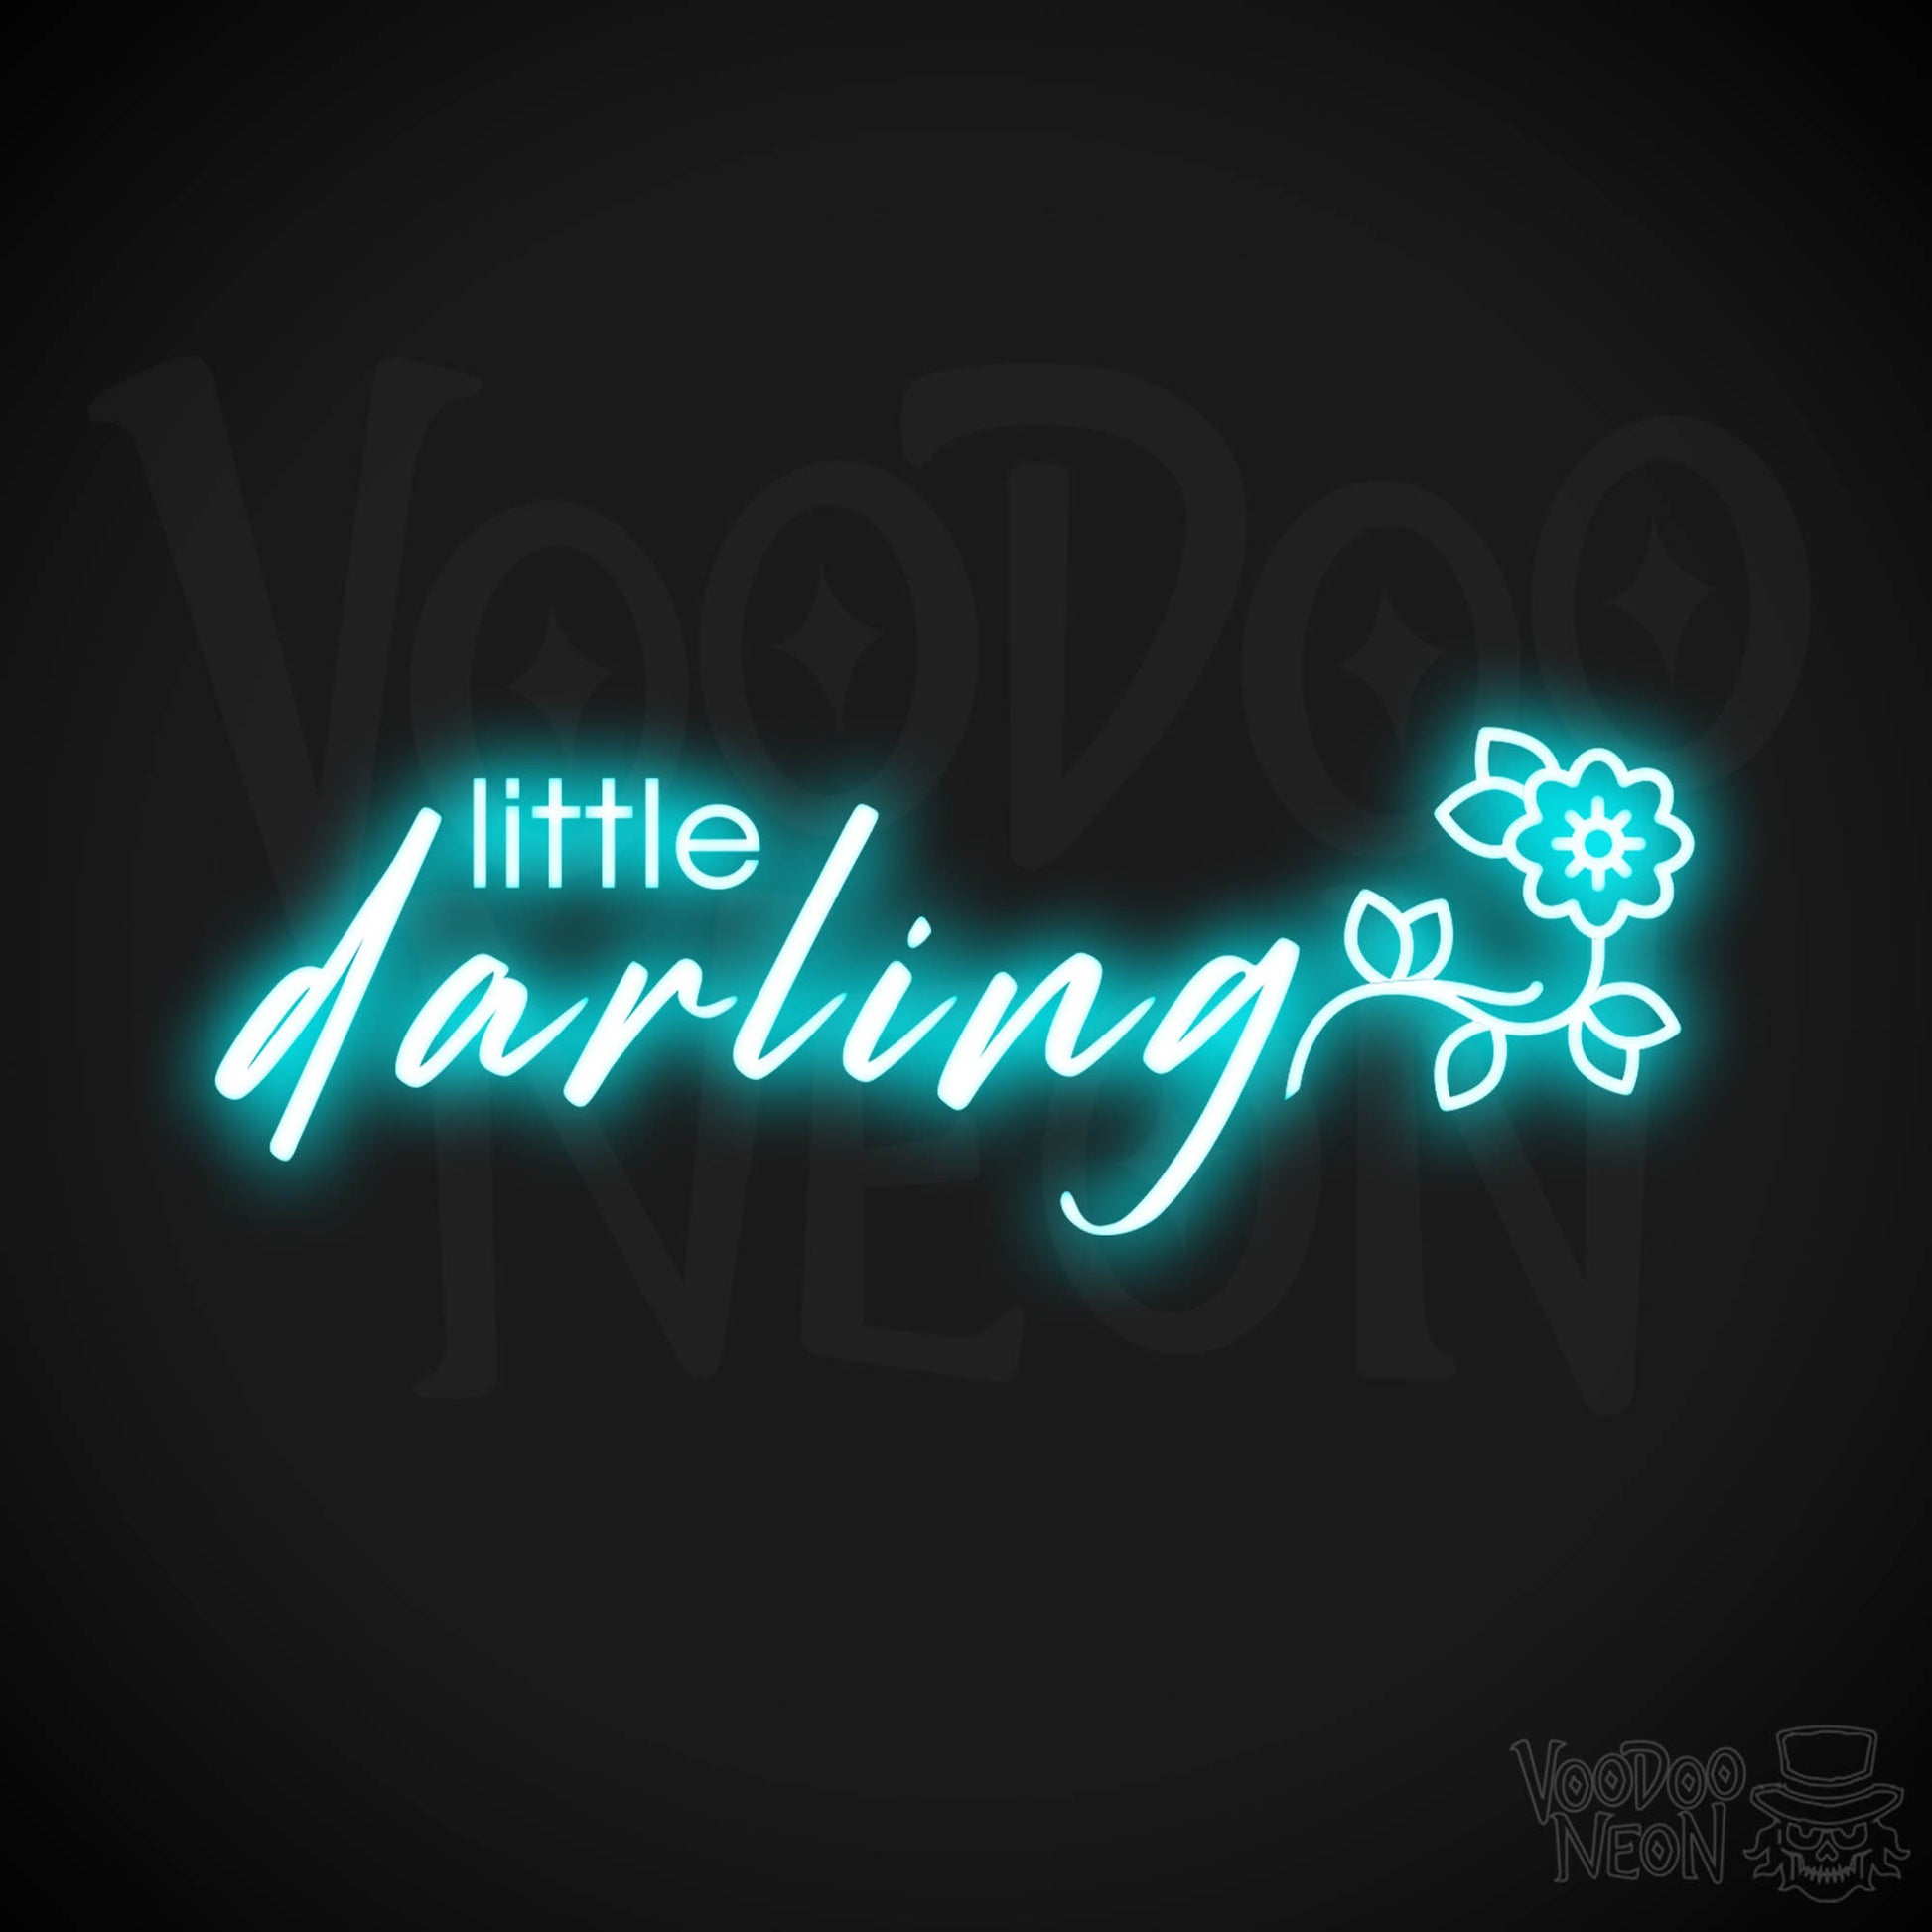 Little Darling Neon Sign - Neon Little Darling Sign - Color Ice Blue